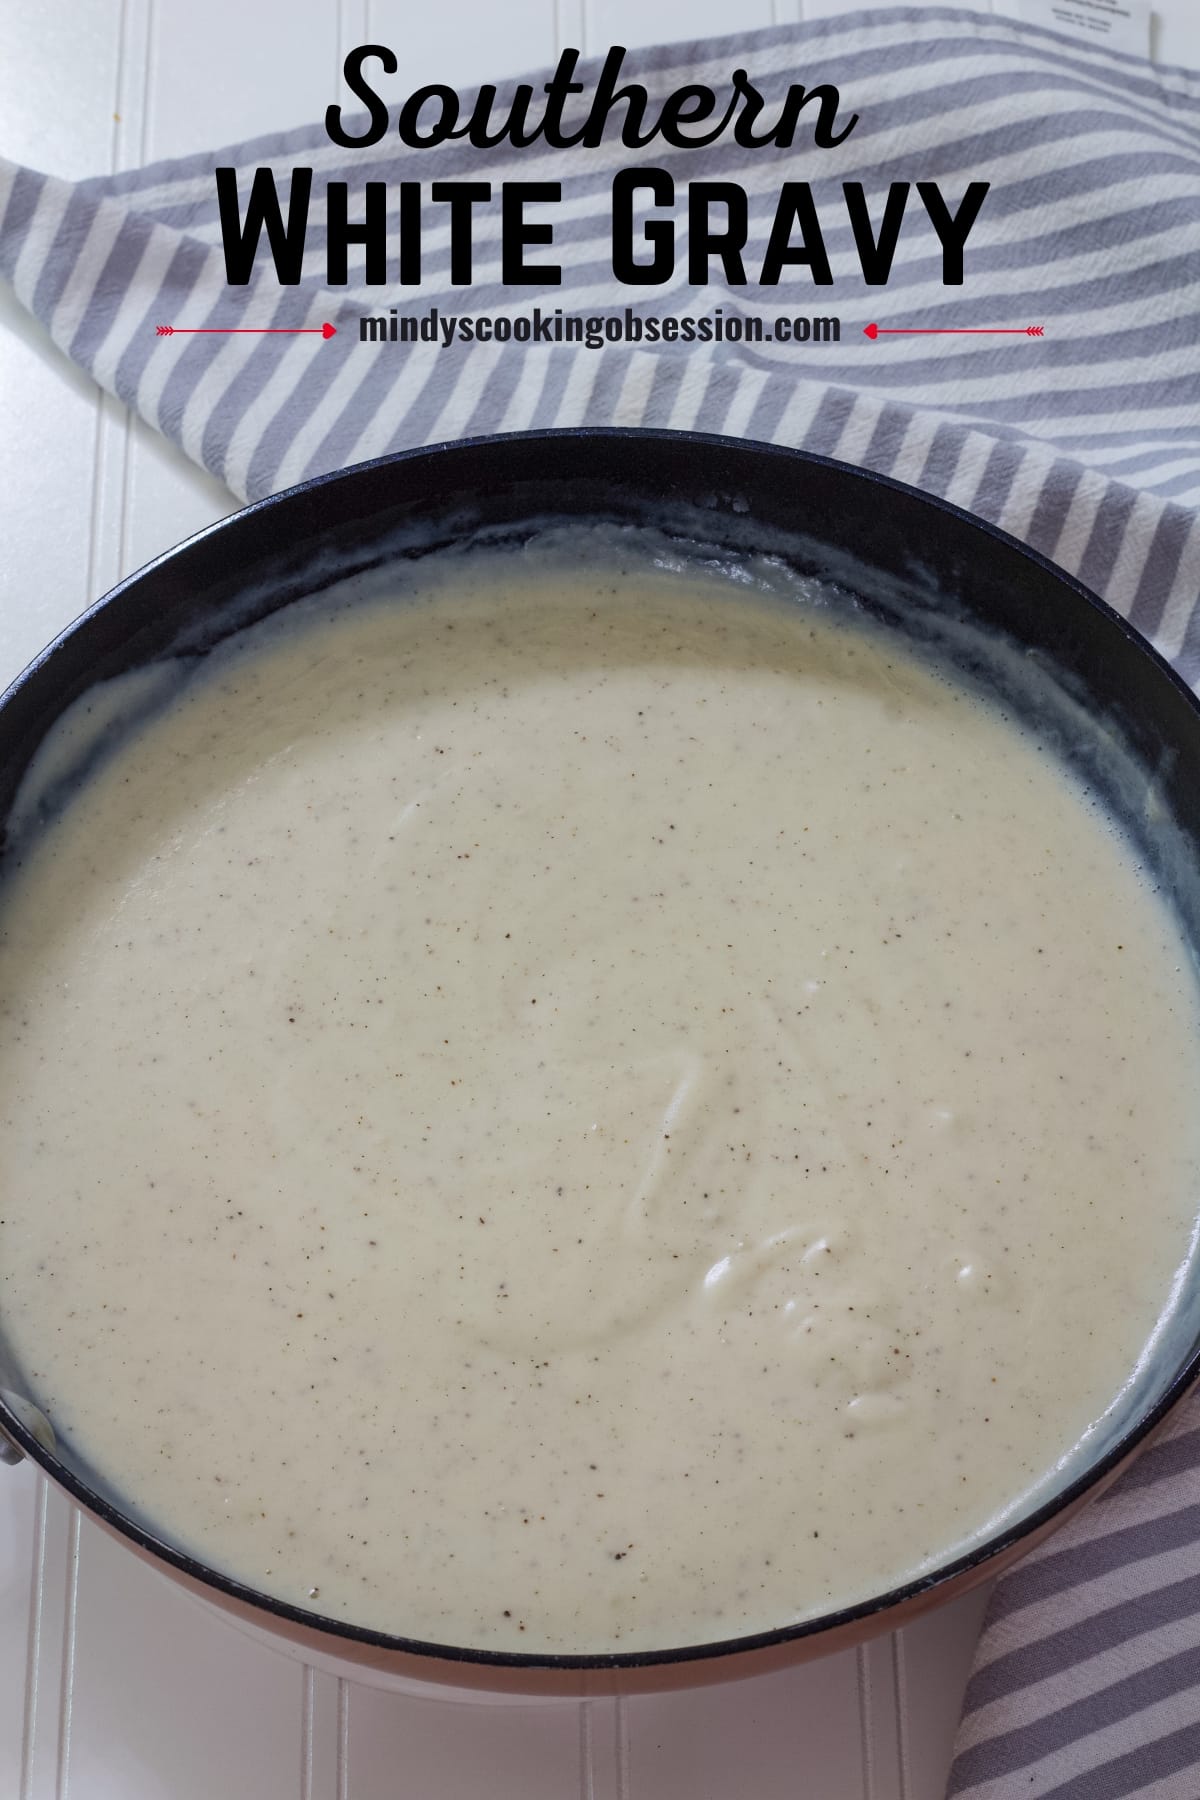 https://www.mindyscookingobsession.com/wp-content/uploads/2023/07/Easy-Homemade-Southern-White-Country-Gravy-Recipe-1.jpg